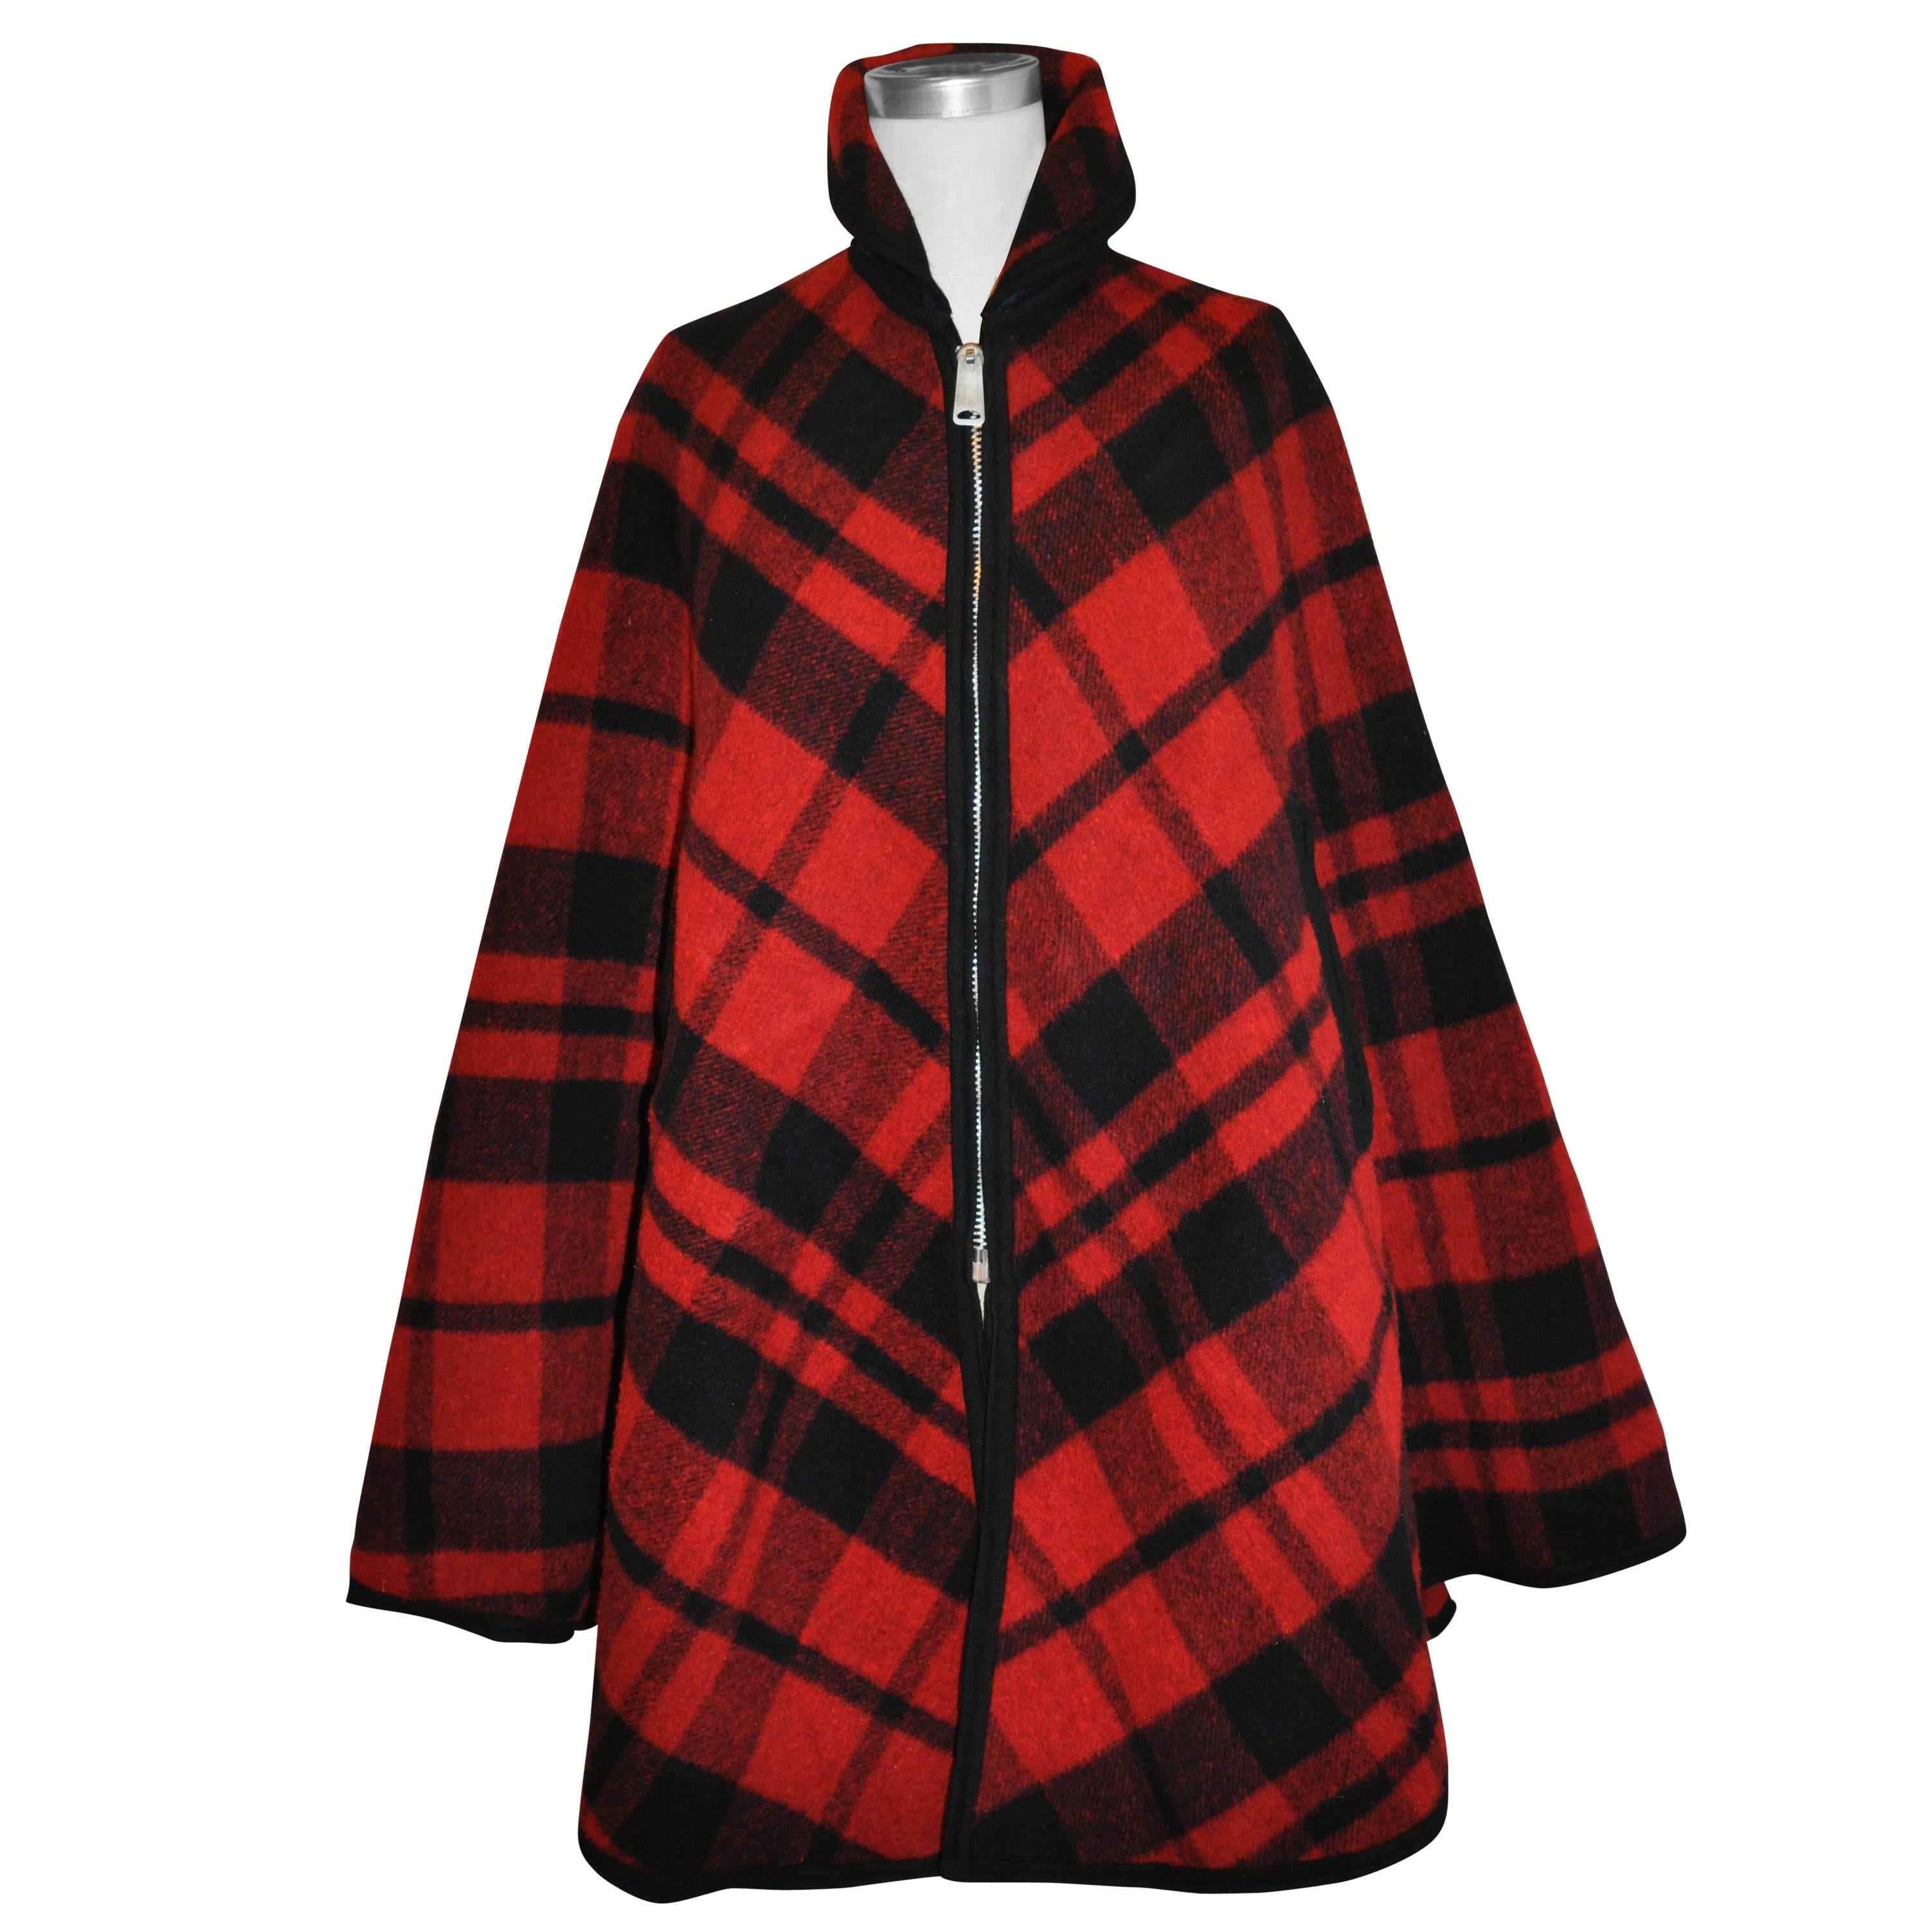 Pendleton Reversible Double-Faced Wool Plaid Poncho